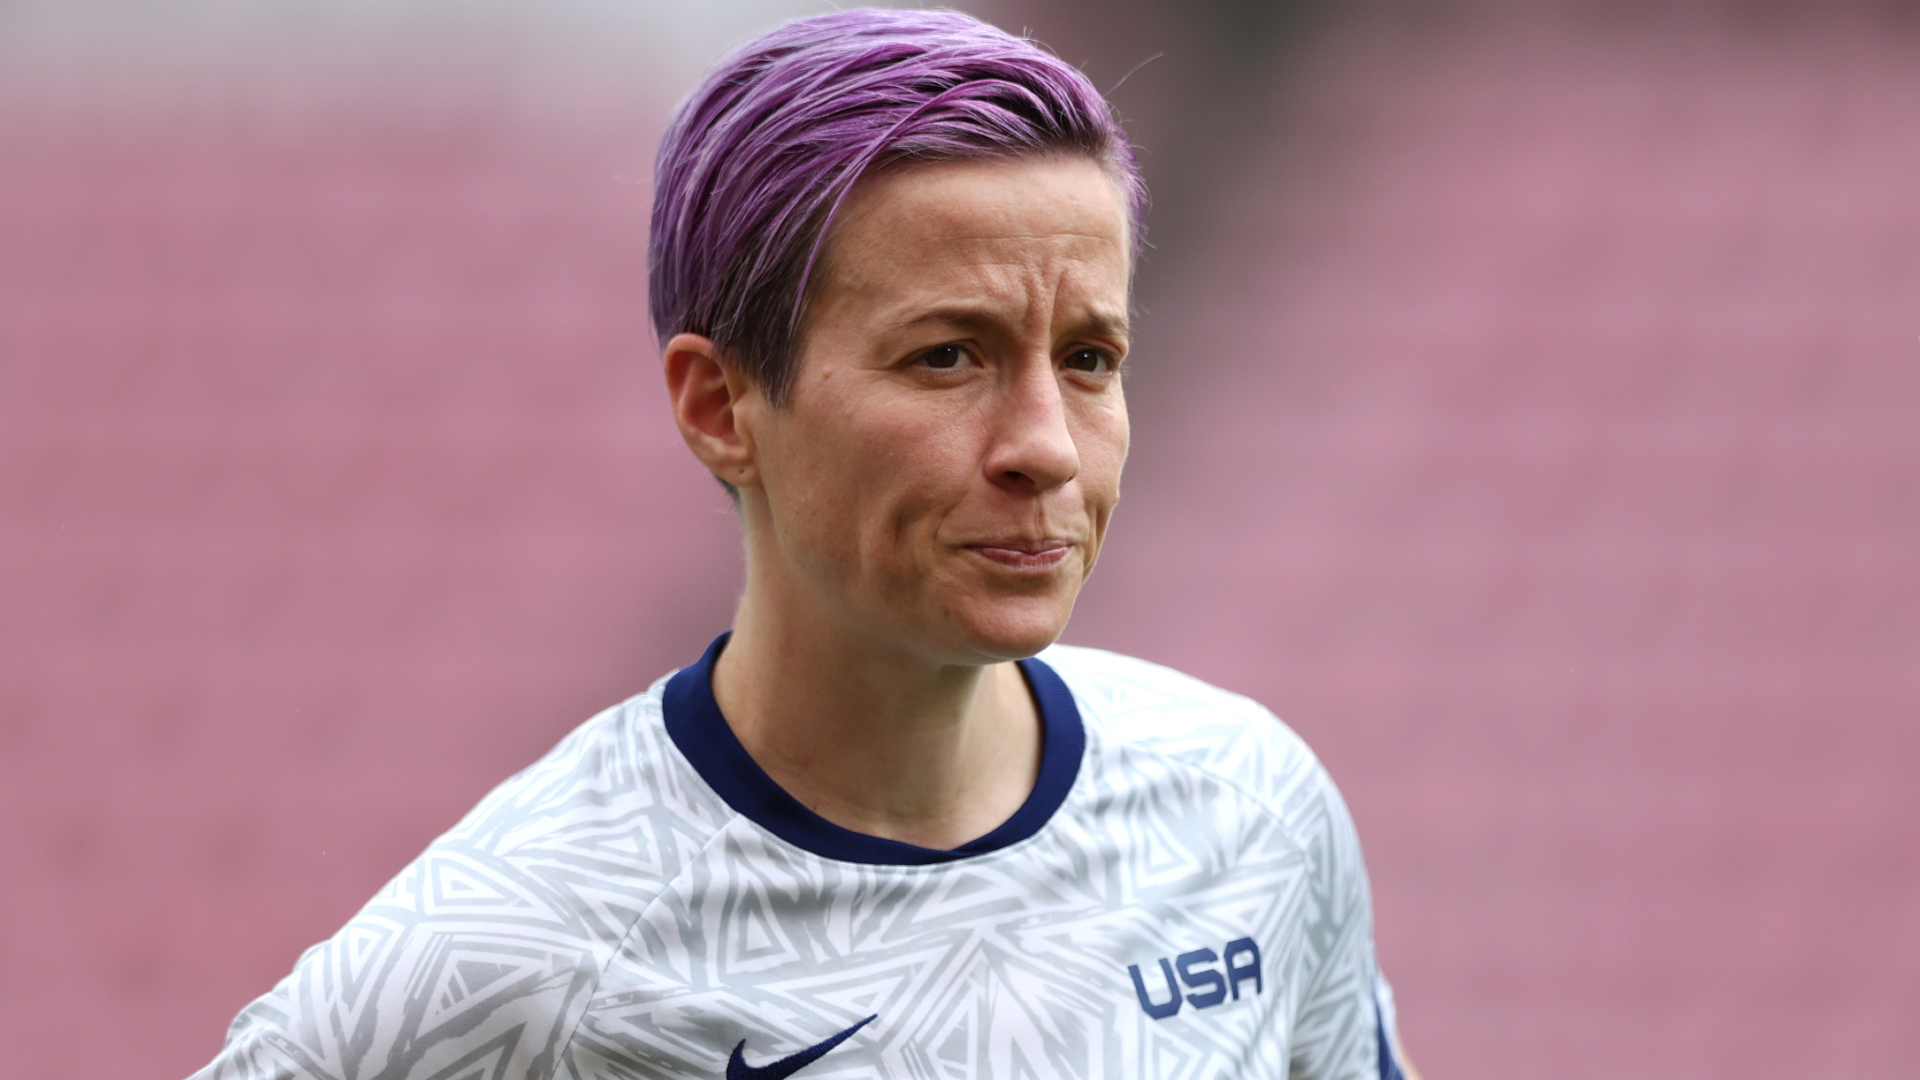 'We haven't had our joy' - Emotional Rapinoe reflects on USWNT Olympic disappointment following Canada upset